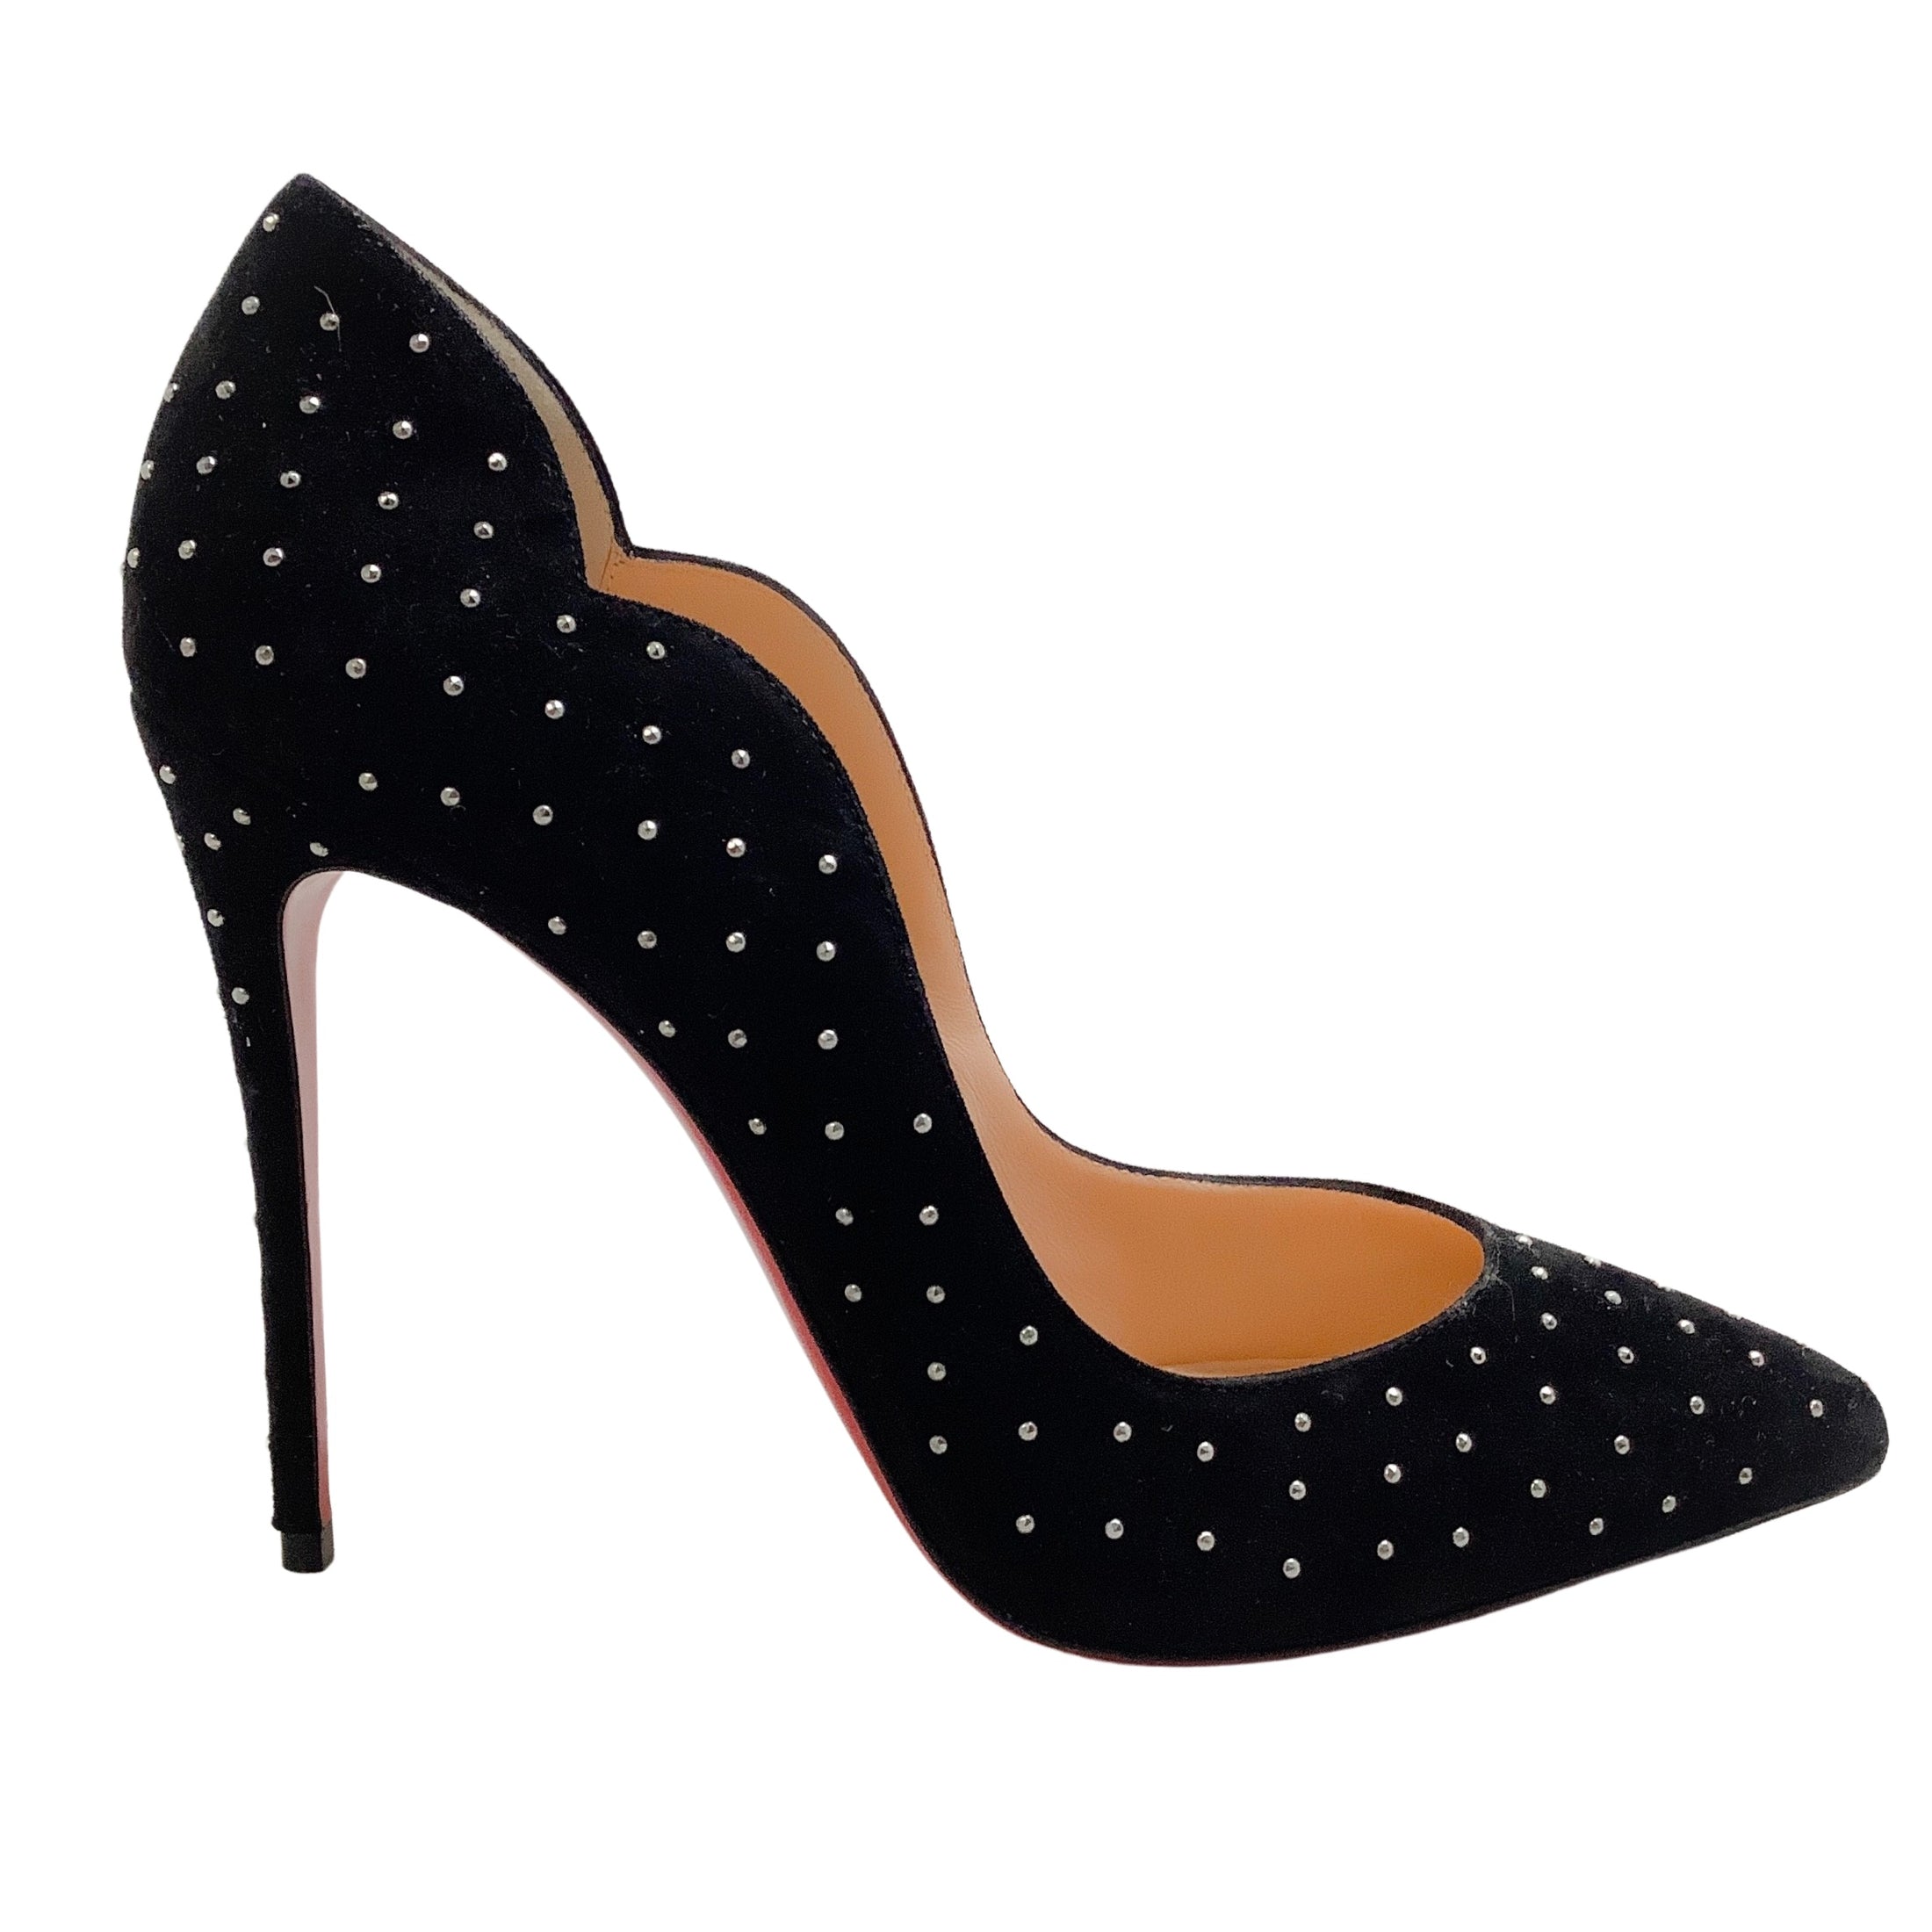 Christian Louboutin Black Suede Wavy Pumps with Silver Studs